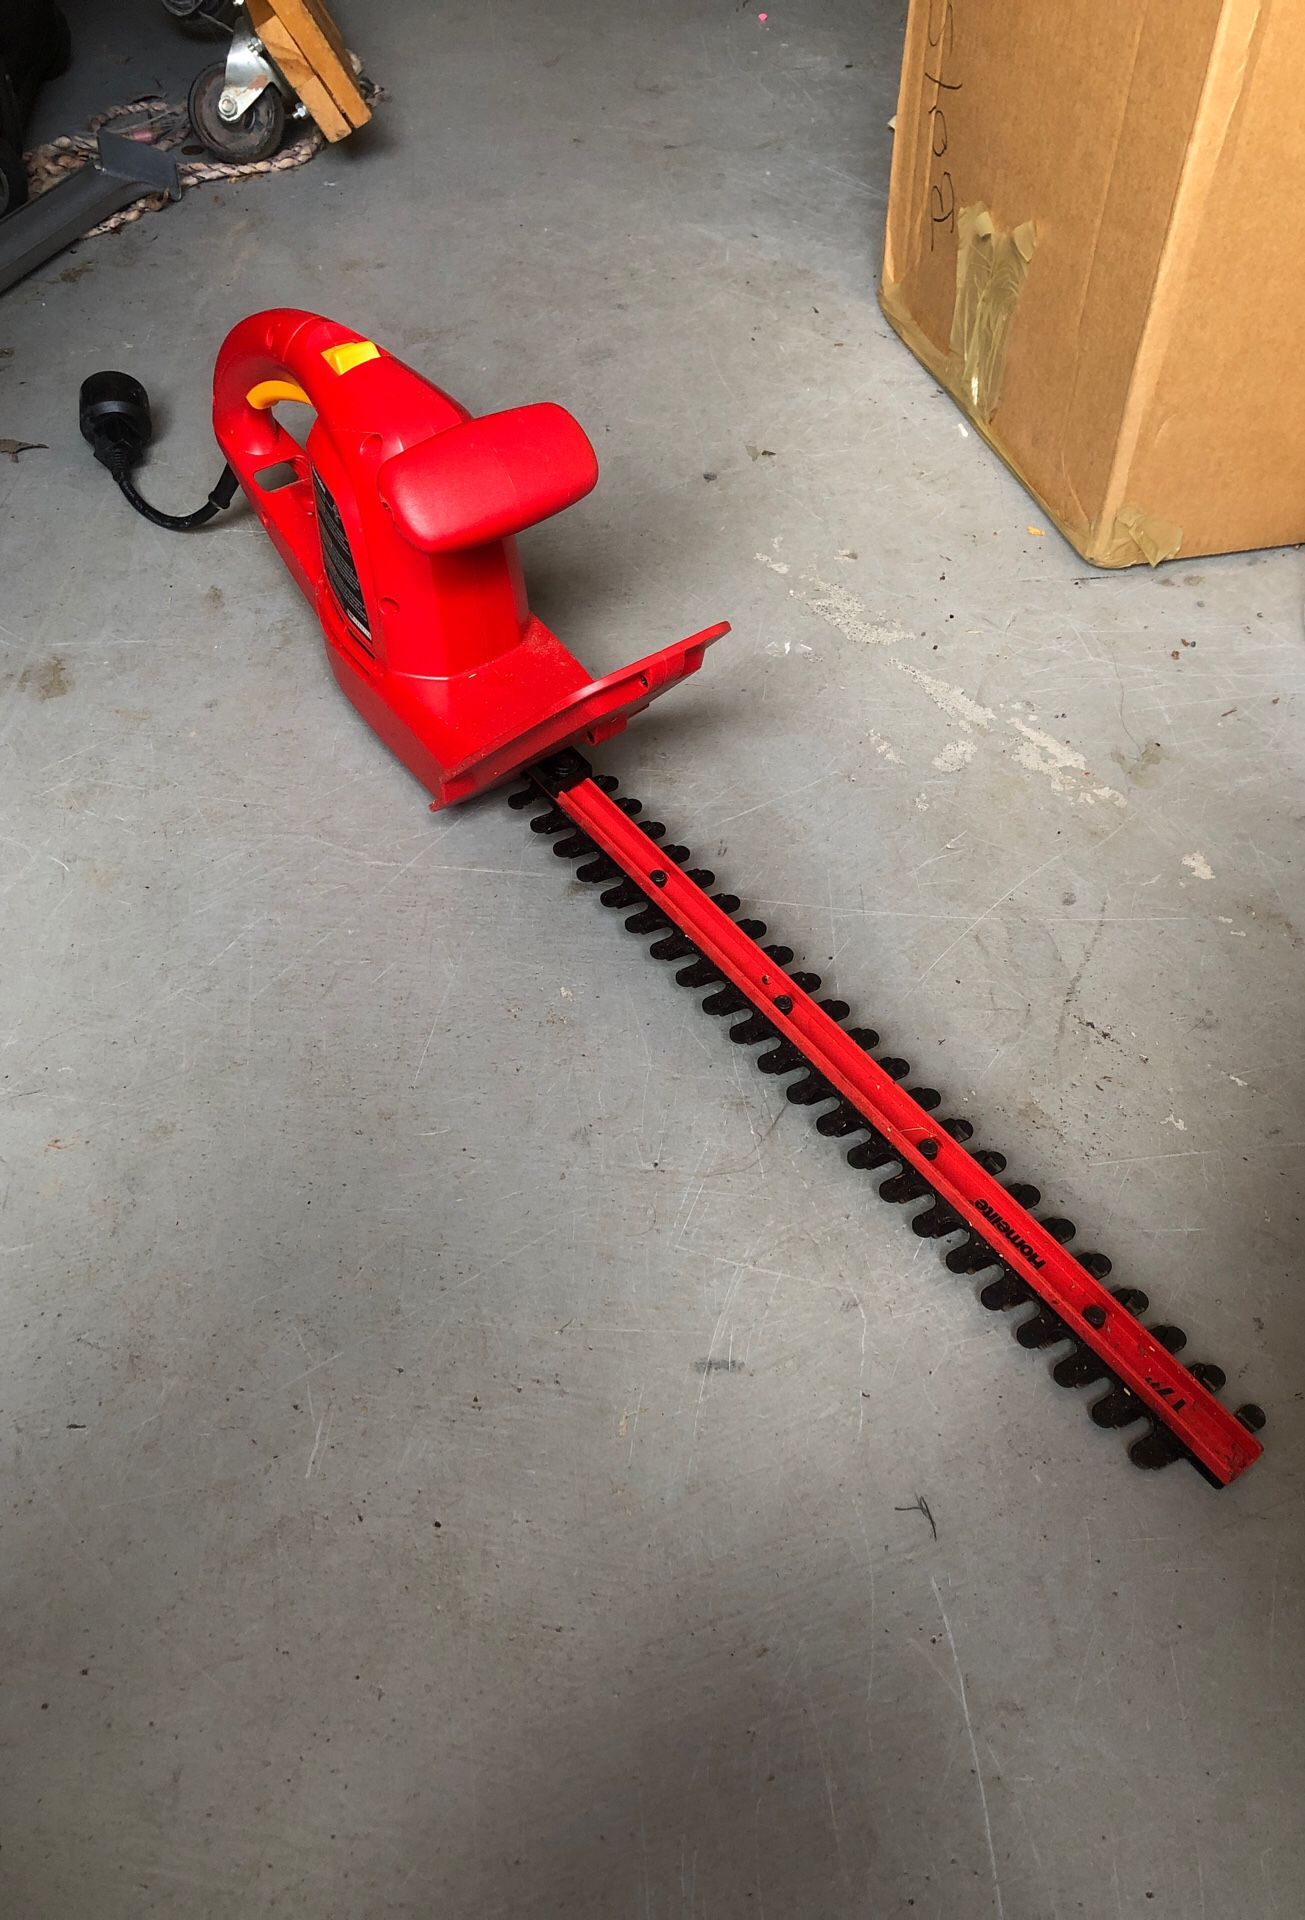 Holmes gently used landscaping trimmer